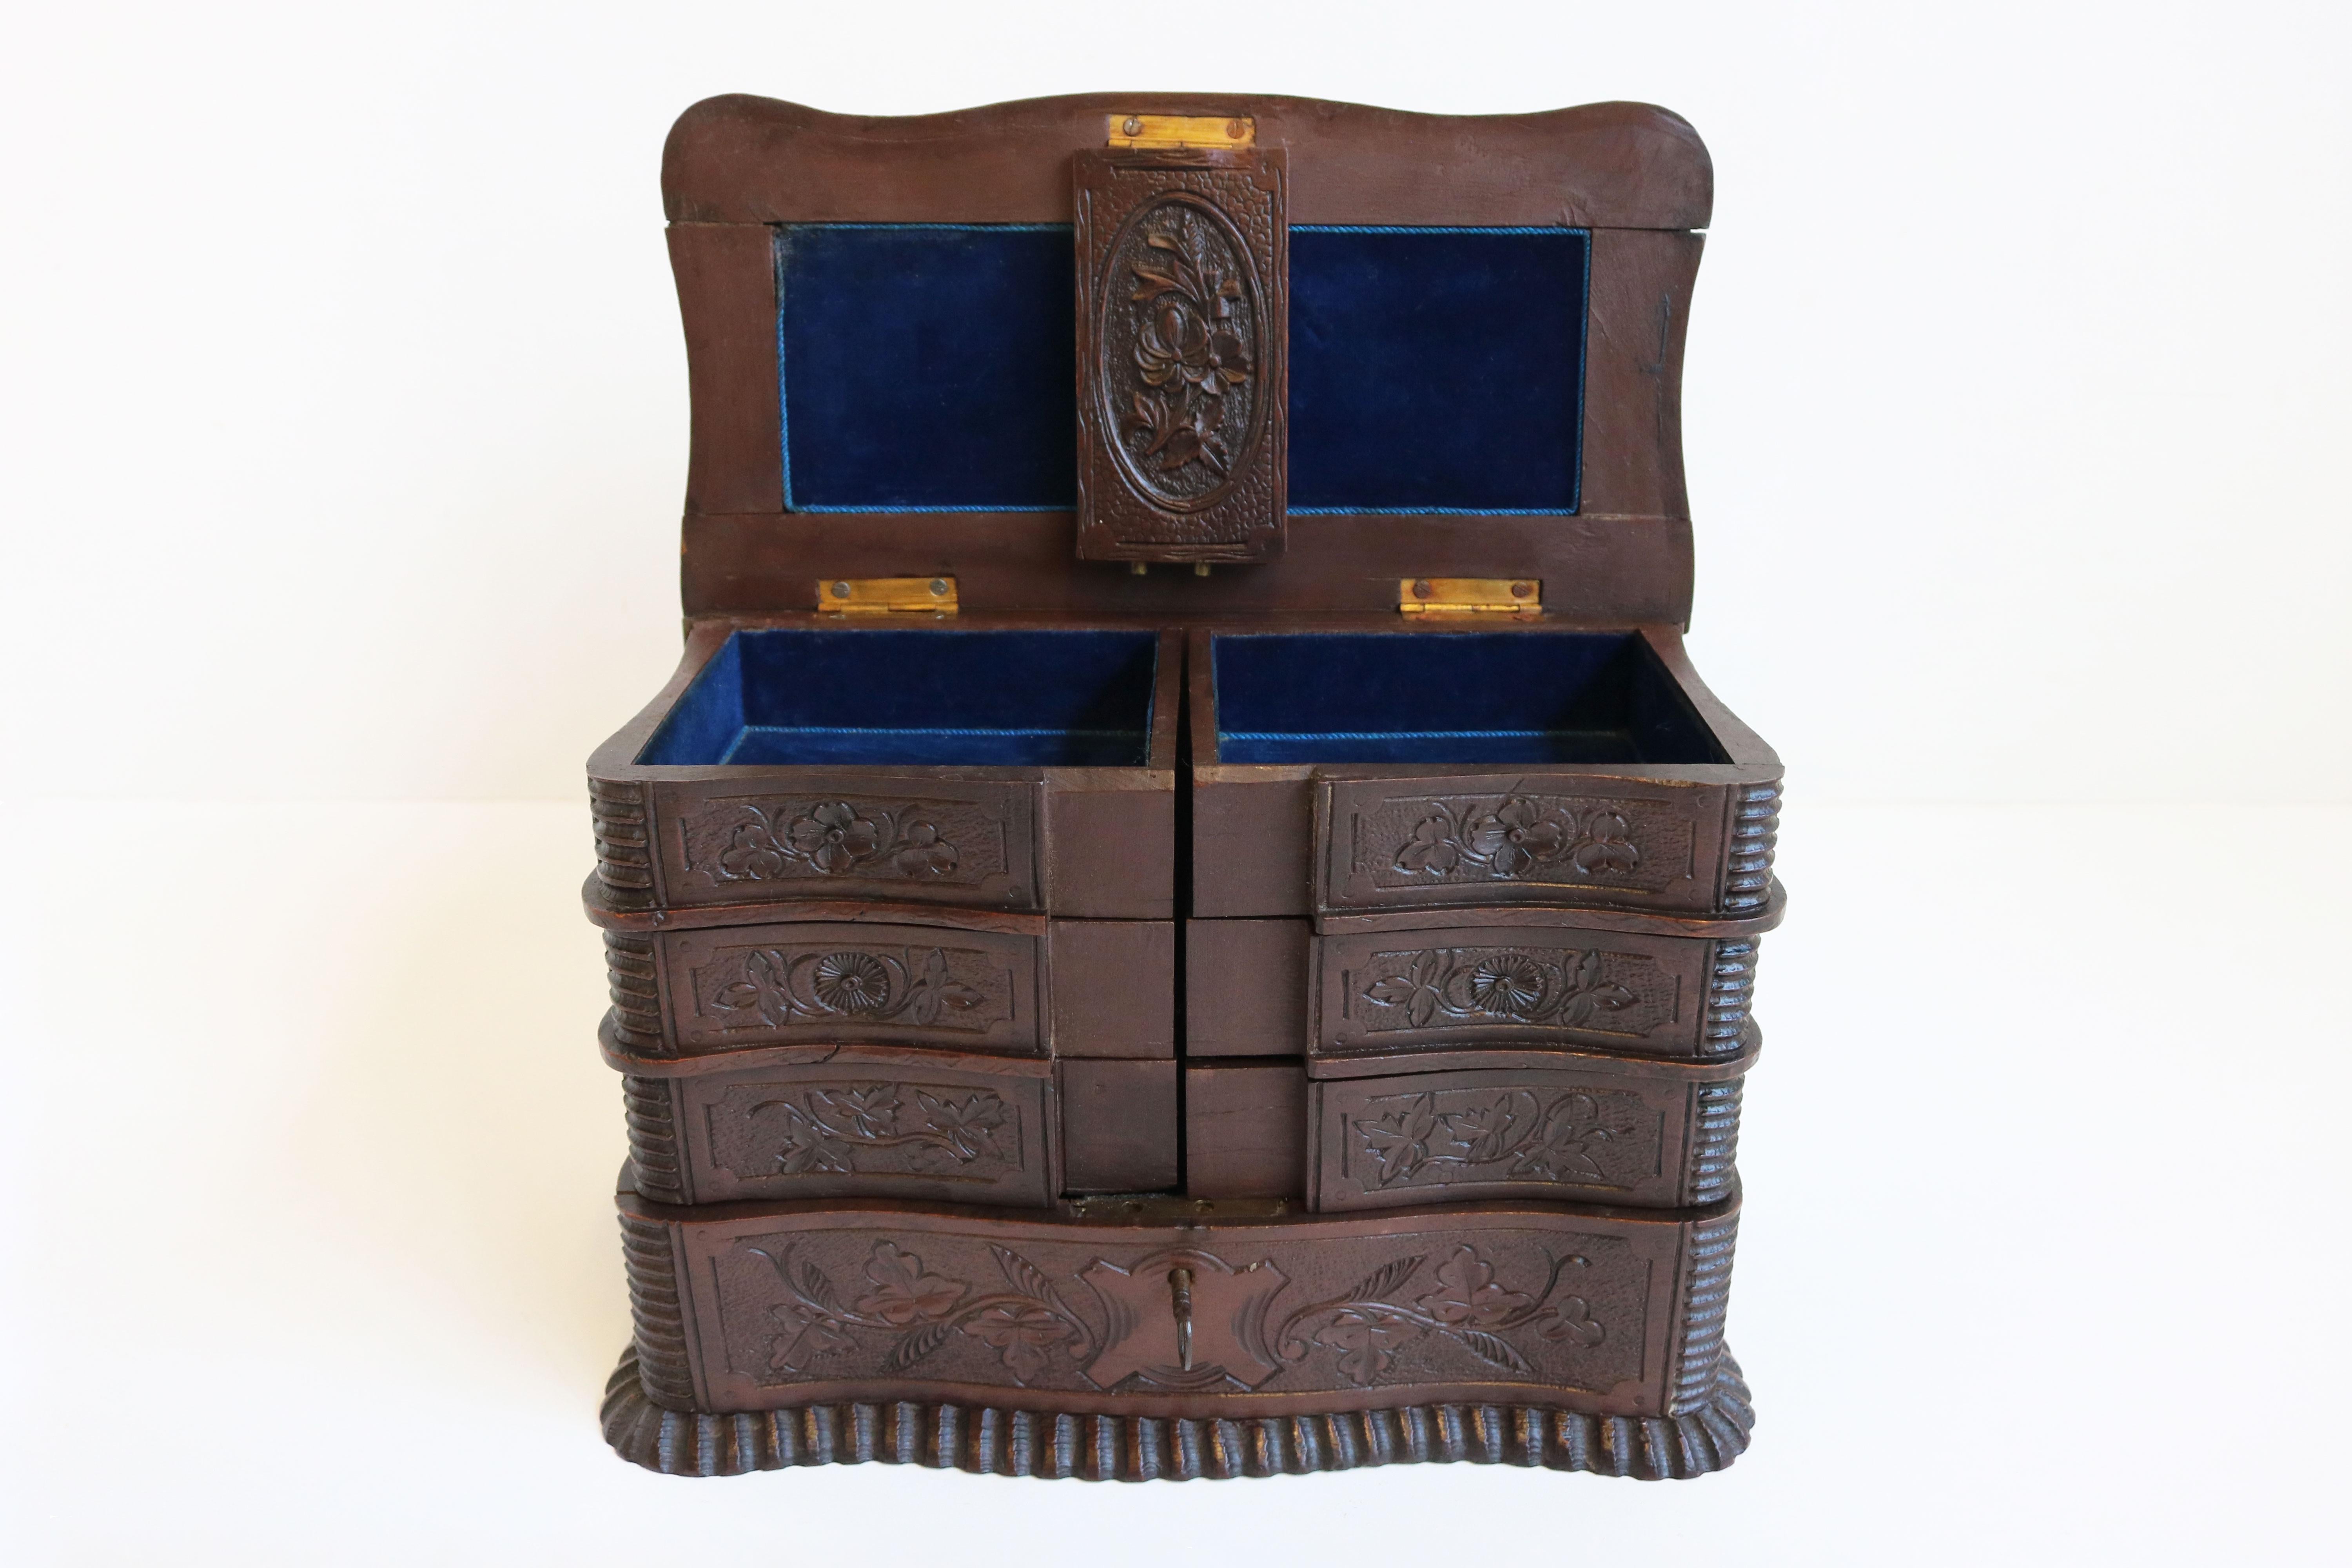 Rare Antique 4 Tier Black Forest Jewelry Box Fruitwood 19th Century Hand Carved For Sale 1